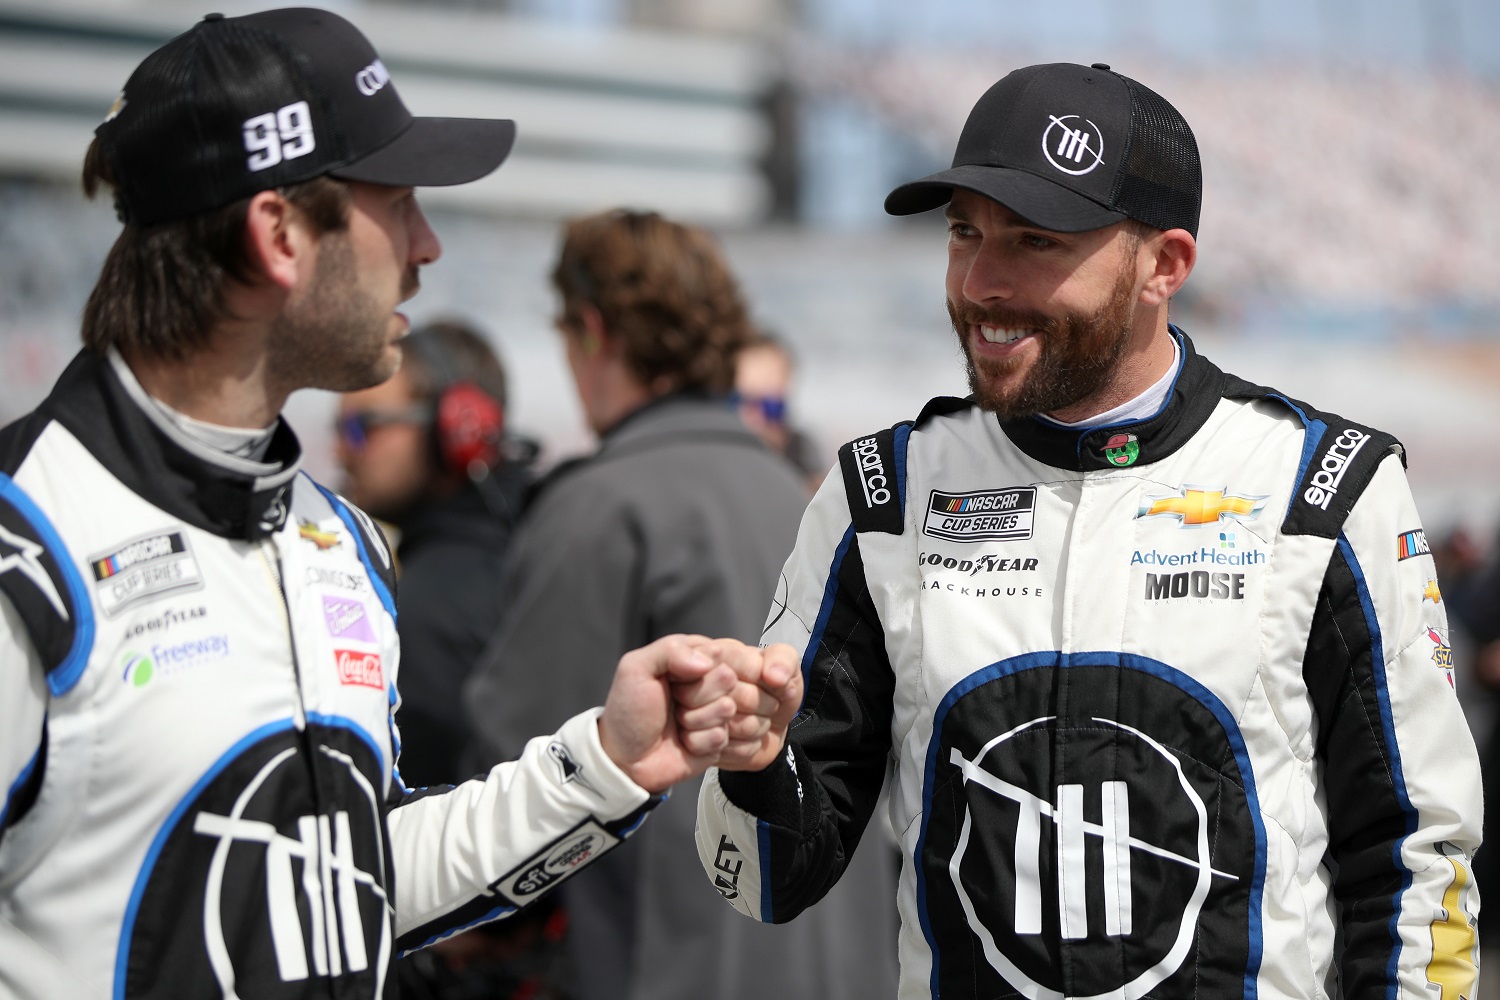 Trackhouse Racing teammates Ross Chastain, driver of the No. 1 Chevrolet, and Daniel Suarez, driver of the No. 99 Chevrolet, bump fists during qualifying for the NASCAR Cup Series Pennzoil 400 at Las Vegas Motor Speedway on March 5, 2022. | Meg Oliphant/Getty Images